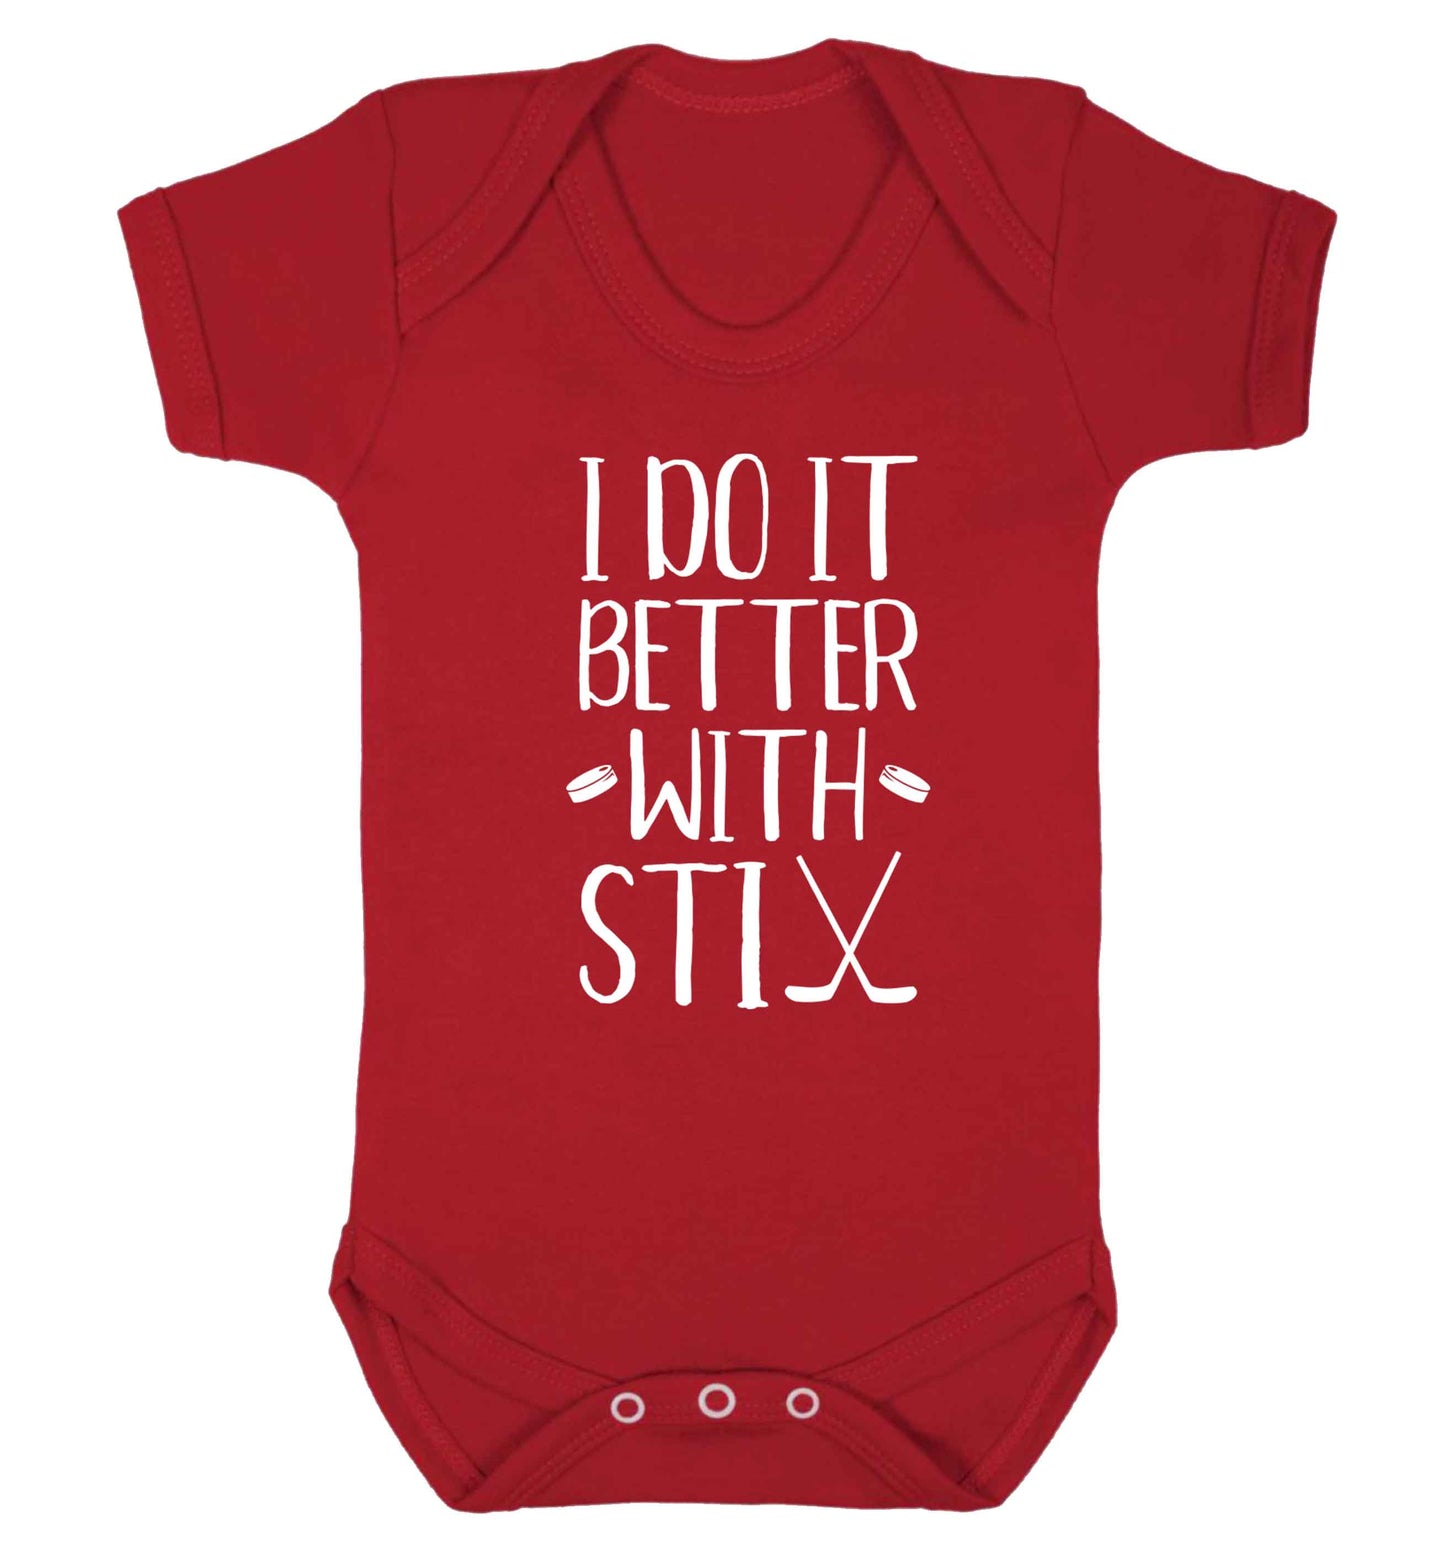 I do it better with stix (hockey) Baby Vest red 18-24 months